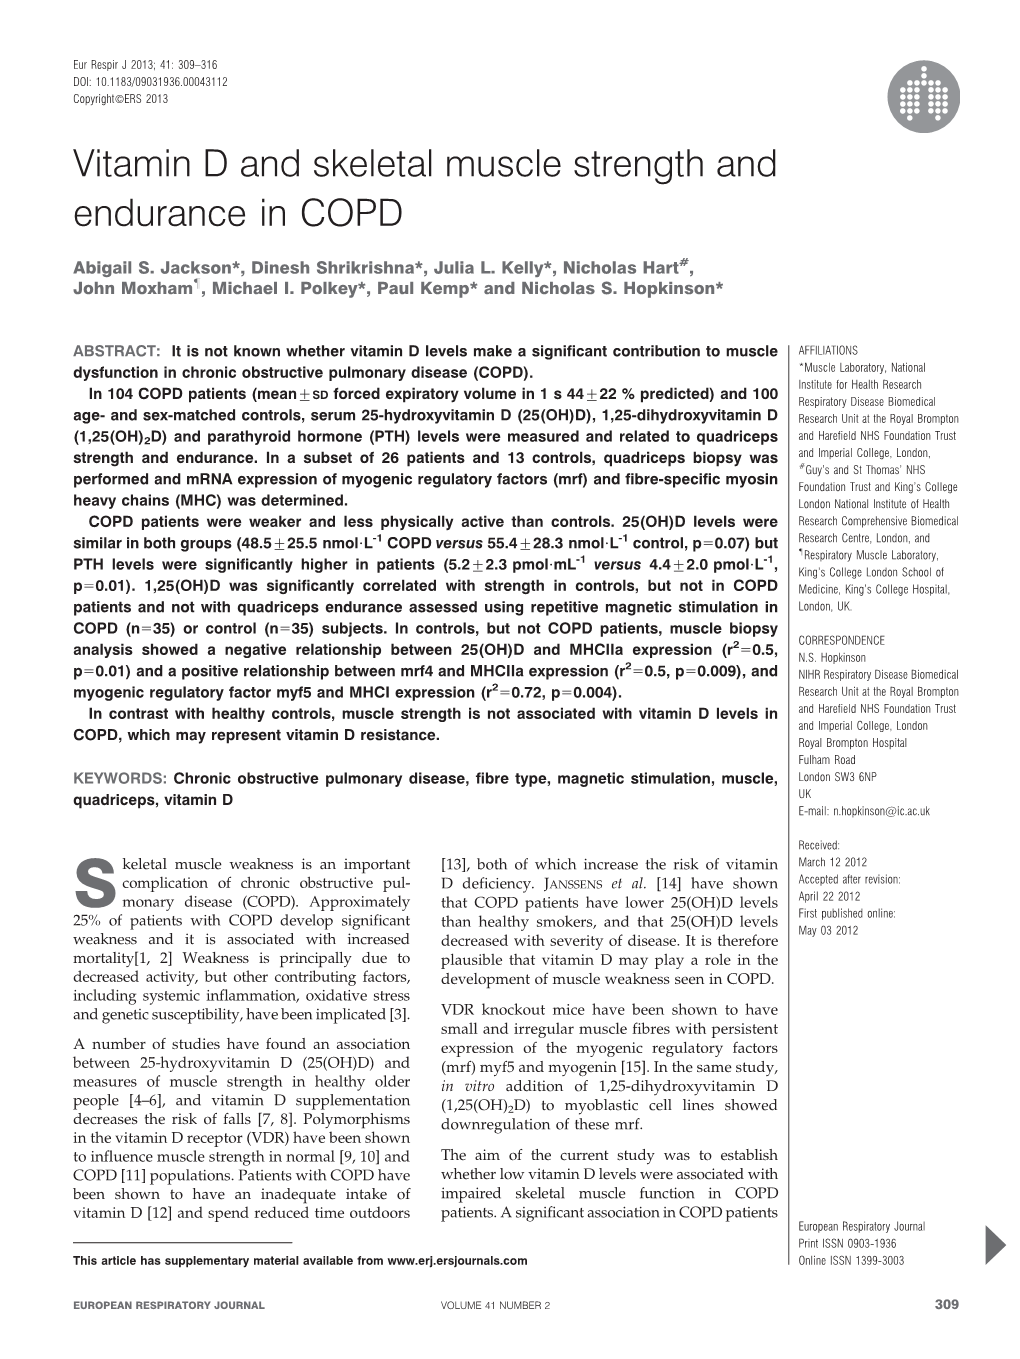 Vitamin D and Skeletal Muscle Strength and Endurance in COPD